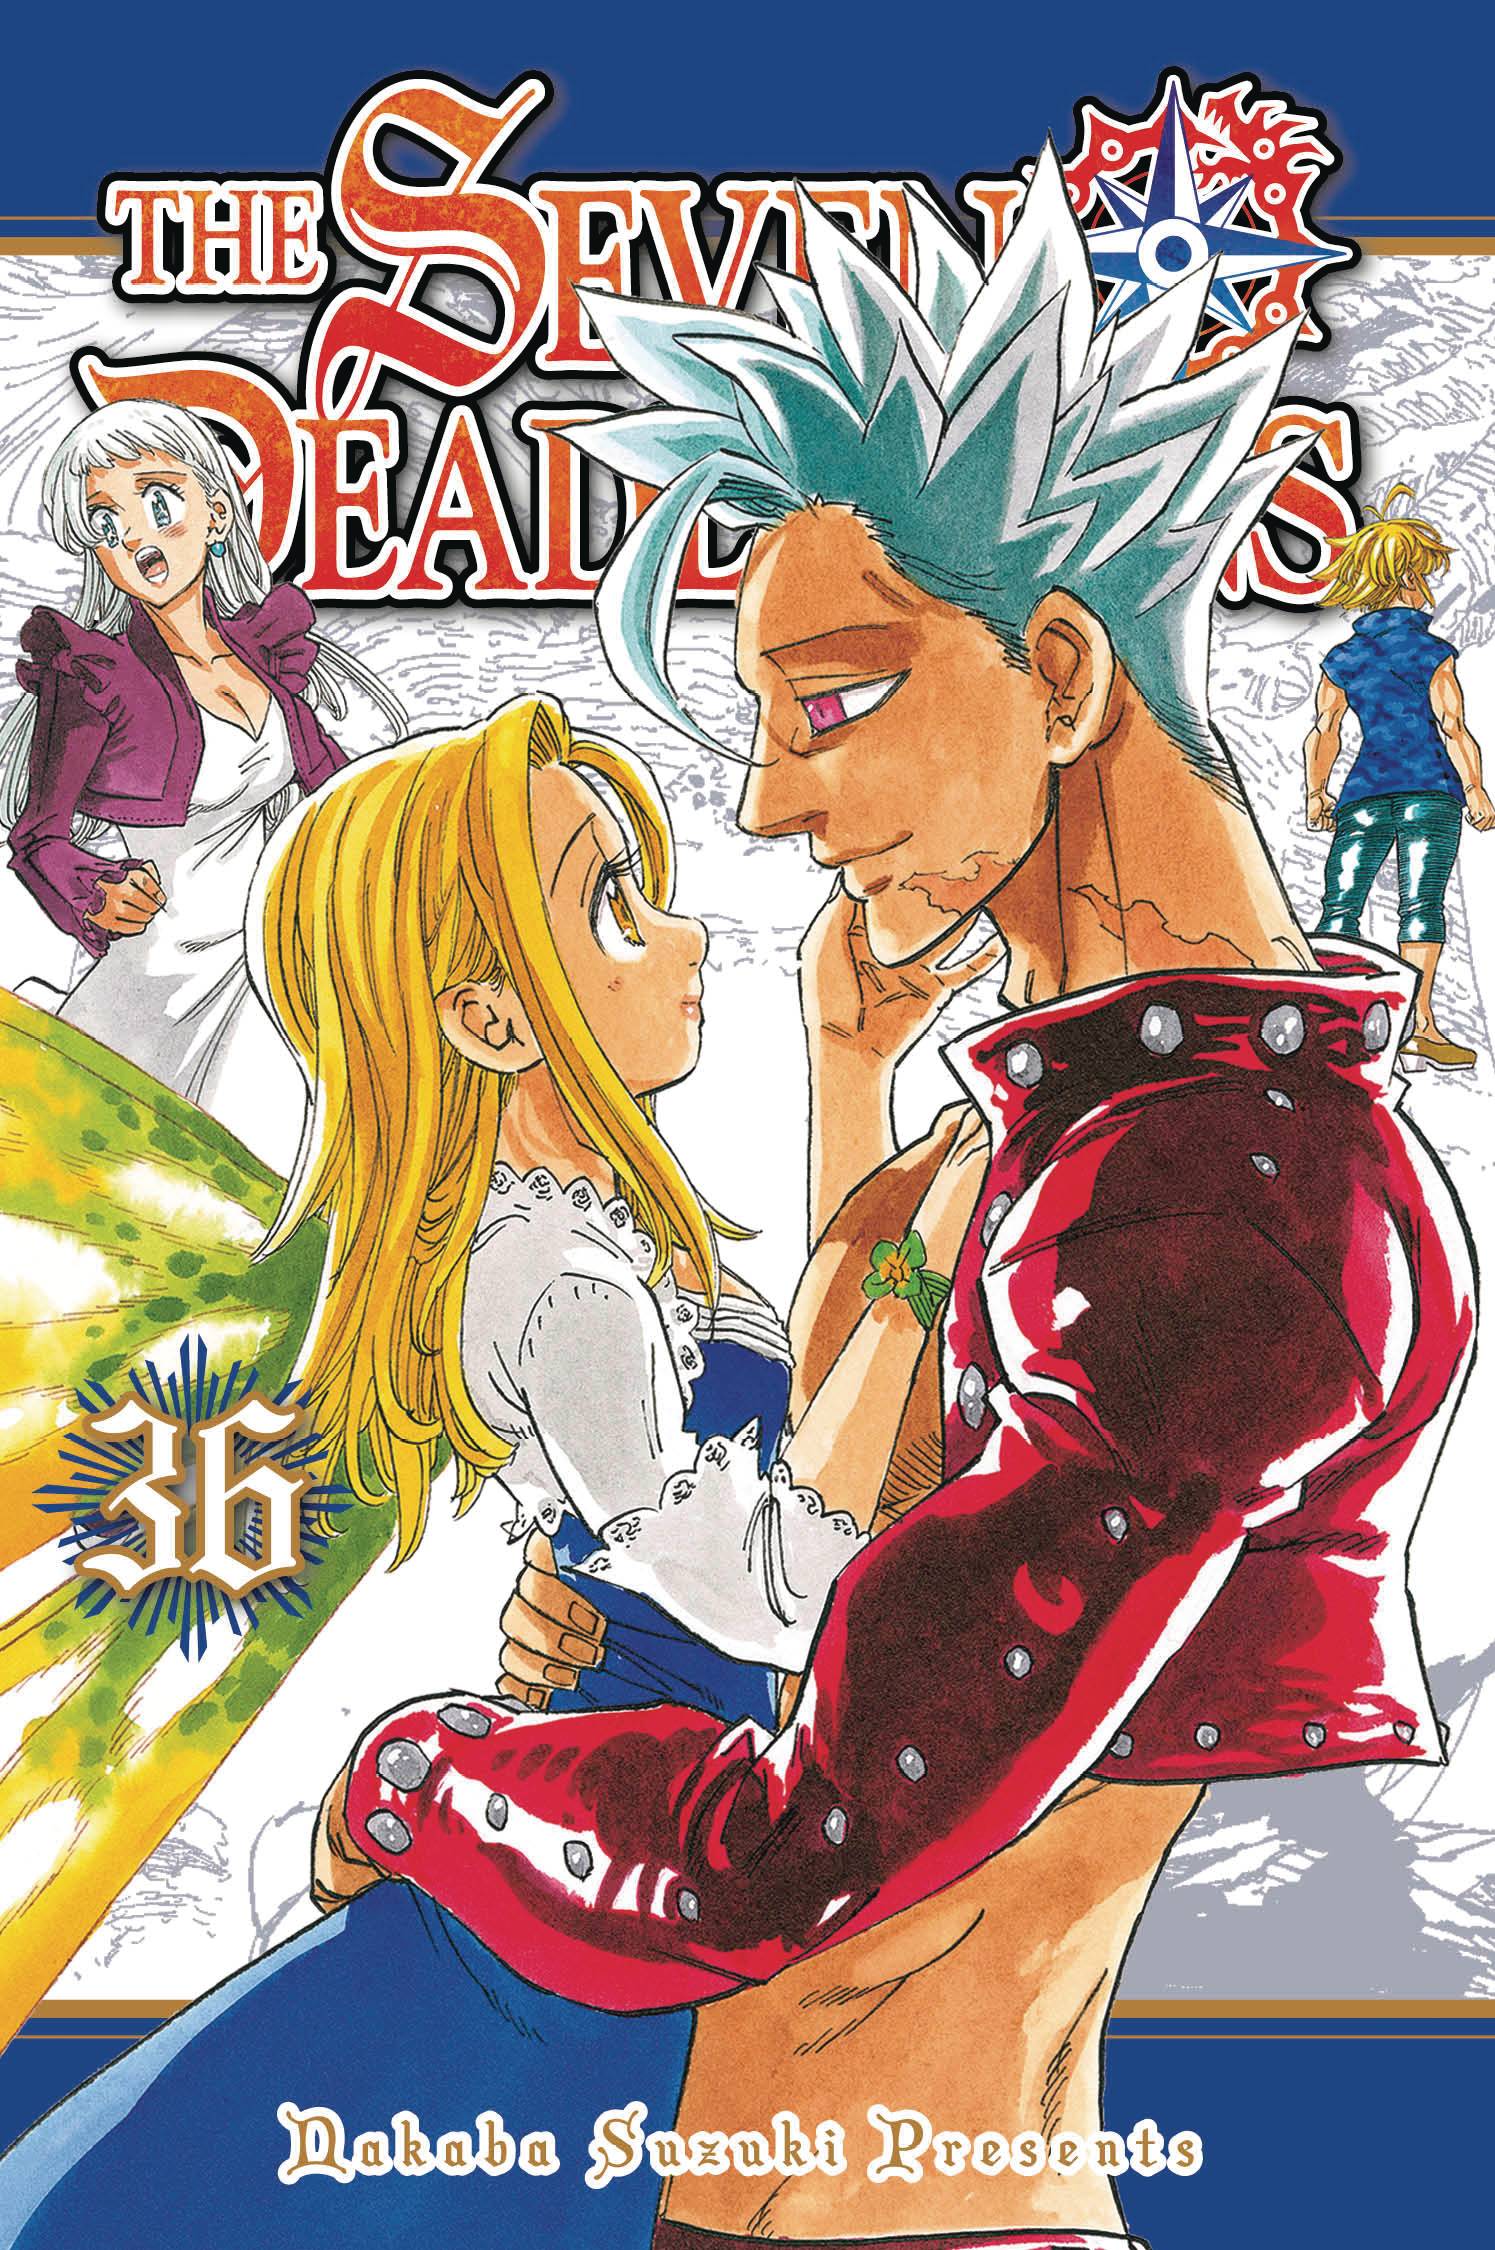 The Seven Deadly Sins #36 (2020)